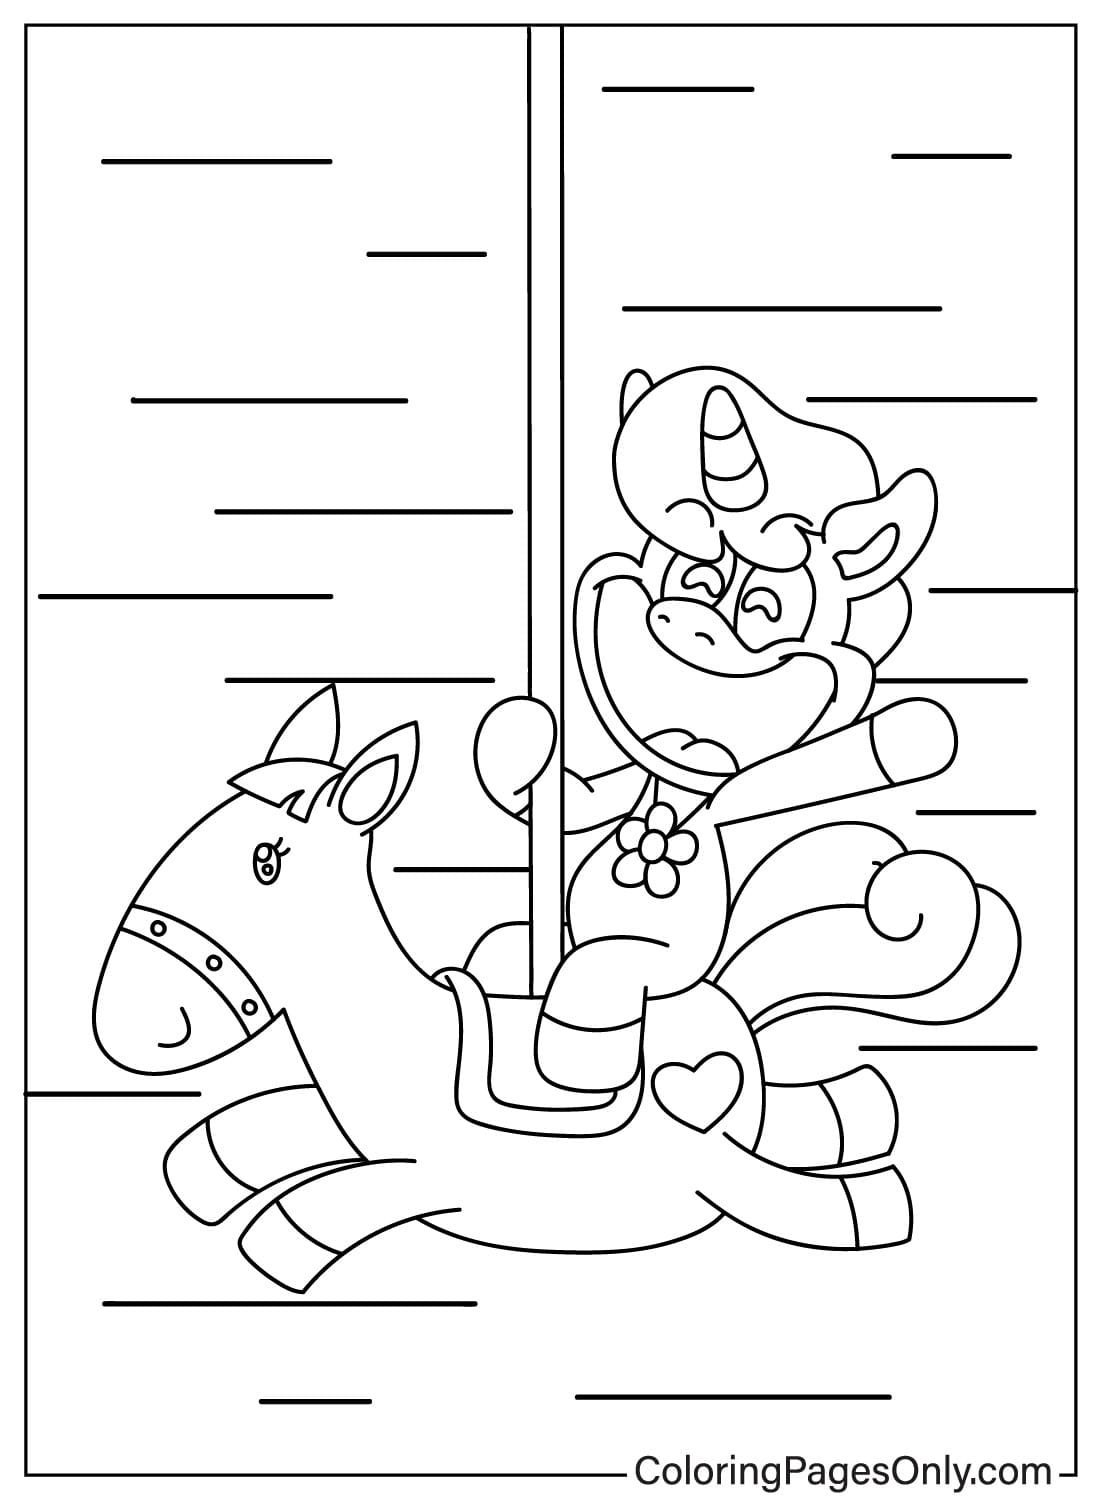 CraftyCorn Coloring Page Sits on a Merry-go-round from CraftyCorn